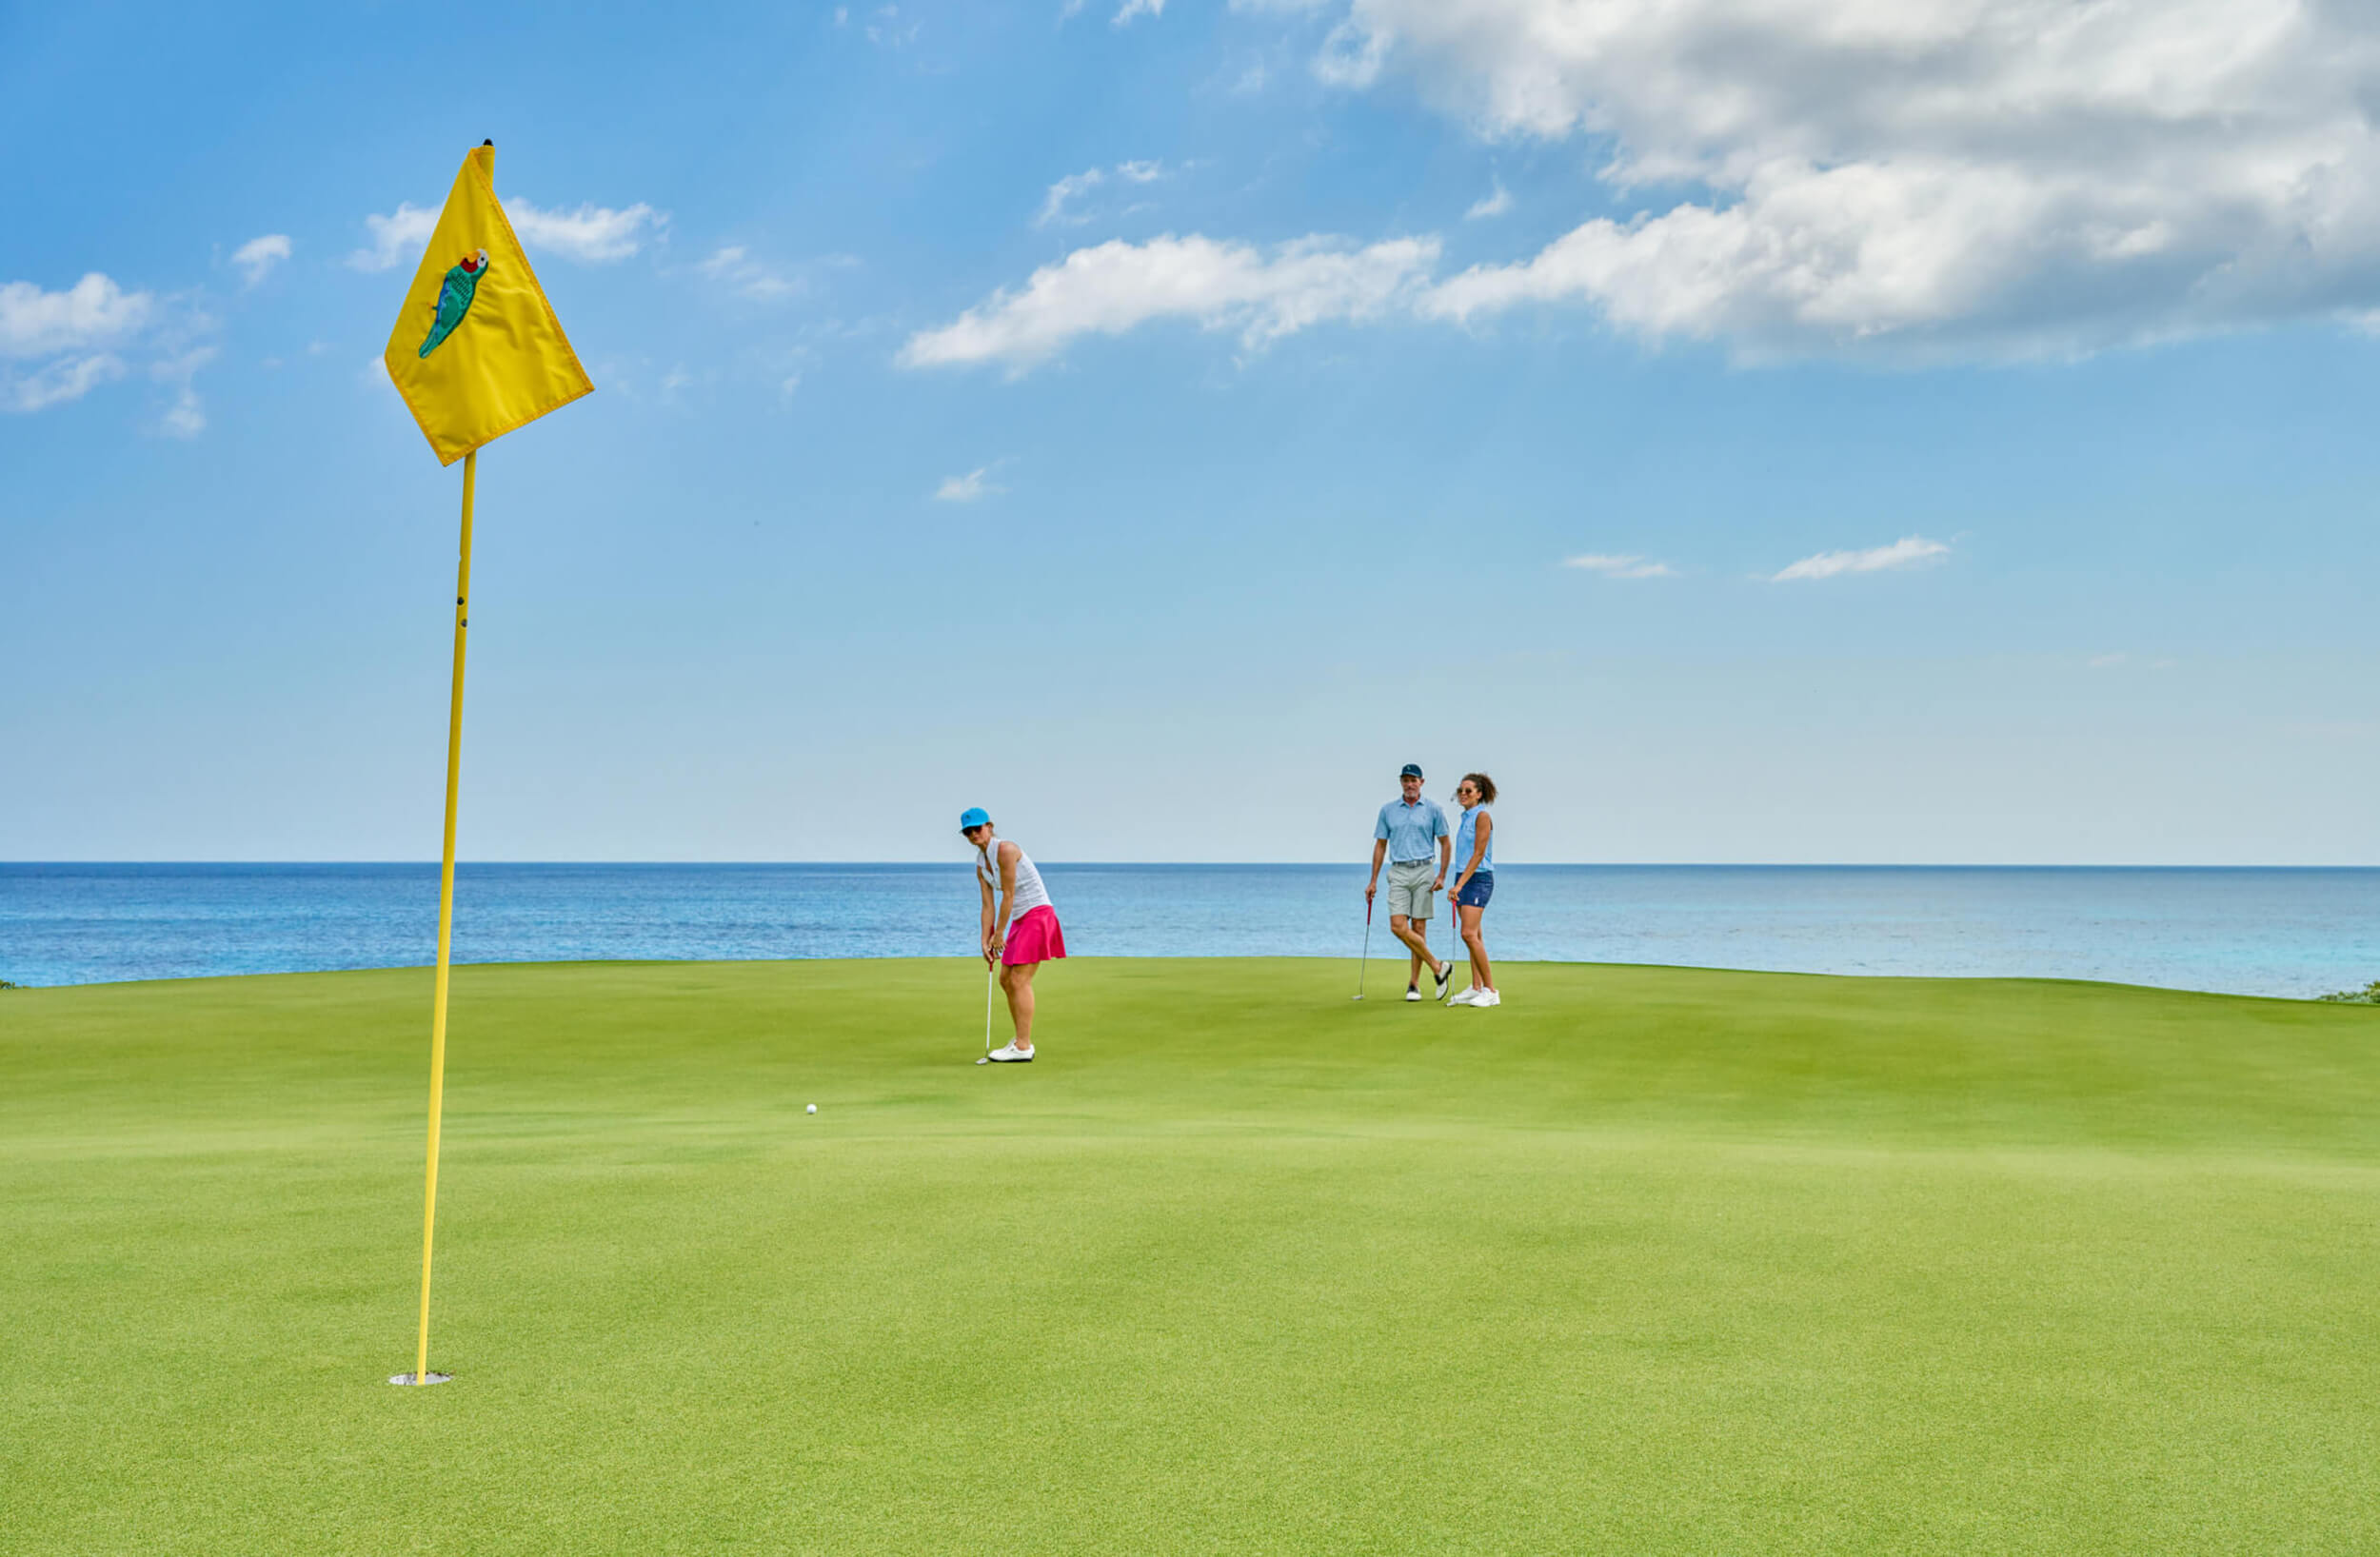 Golfers at The Abaco Club enjoying a sunny day on the greens, with the background of the Bahamian sea